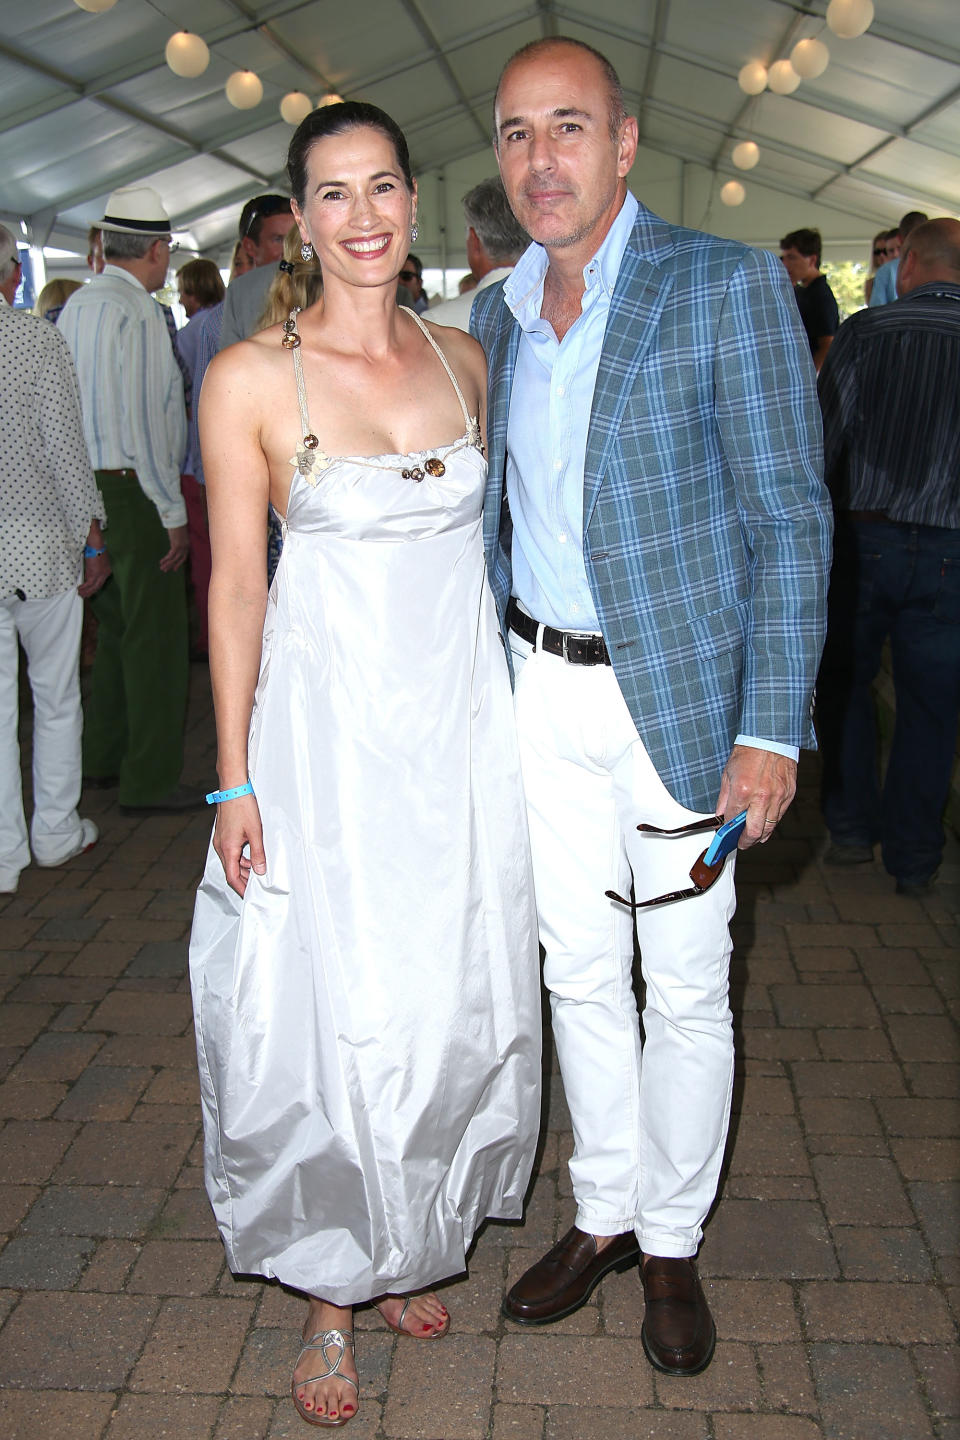 Matt Lauer with his wife, Annette Roque Lauer, at the 2015 Hamptons Classic Grand Prix. (Photo: Sonia Moskowitz/Getty Images)